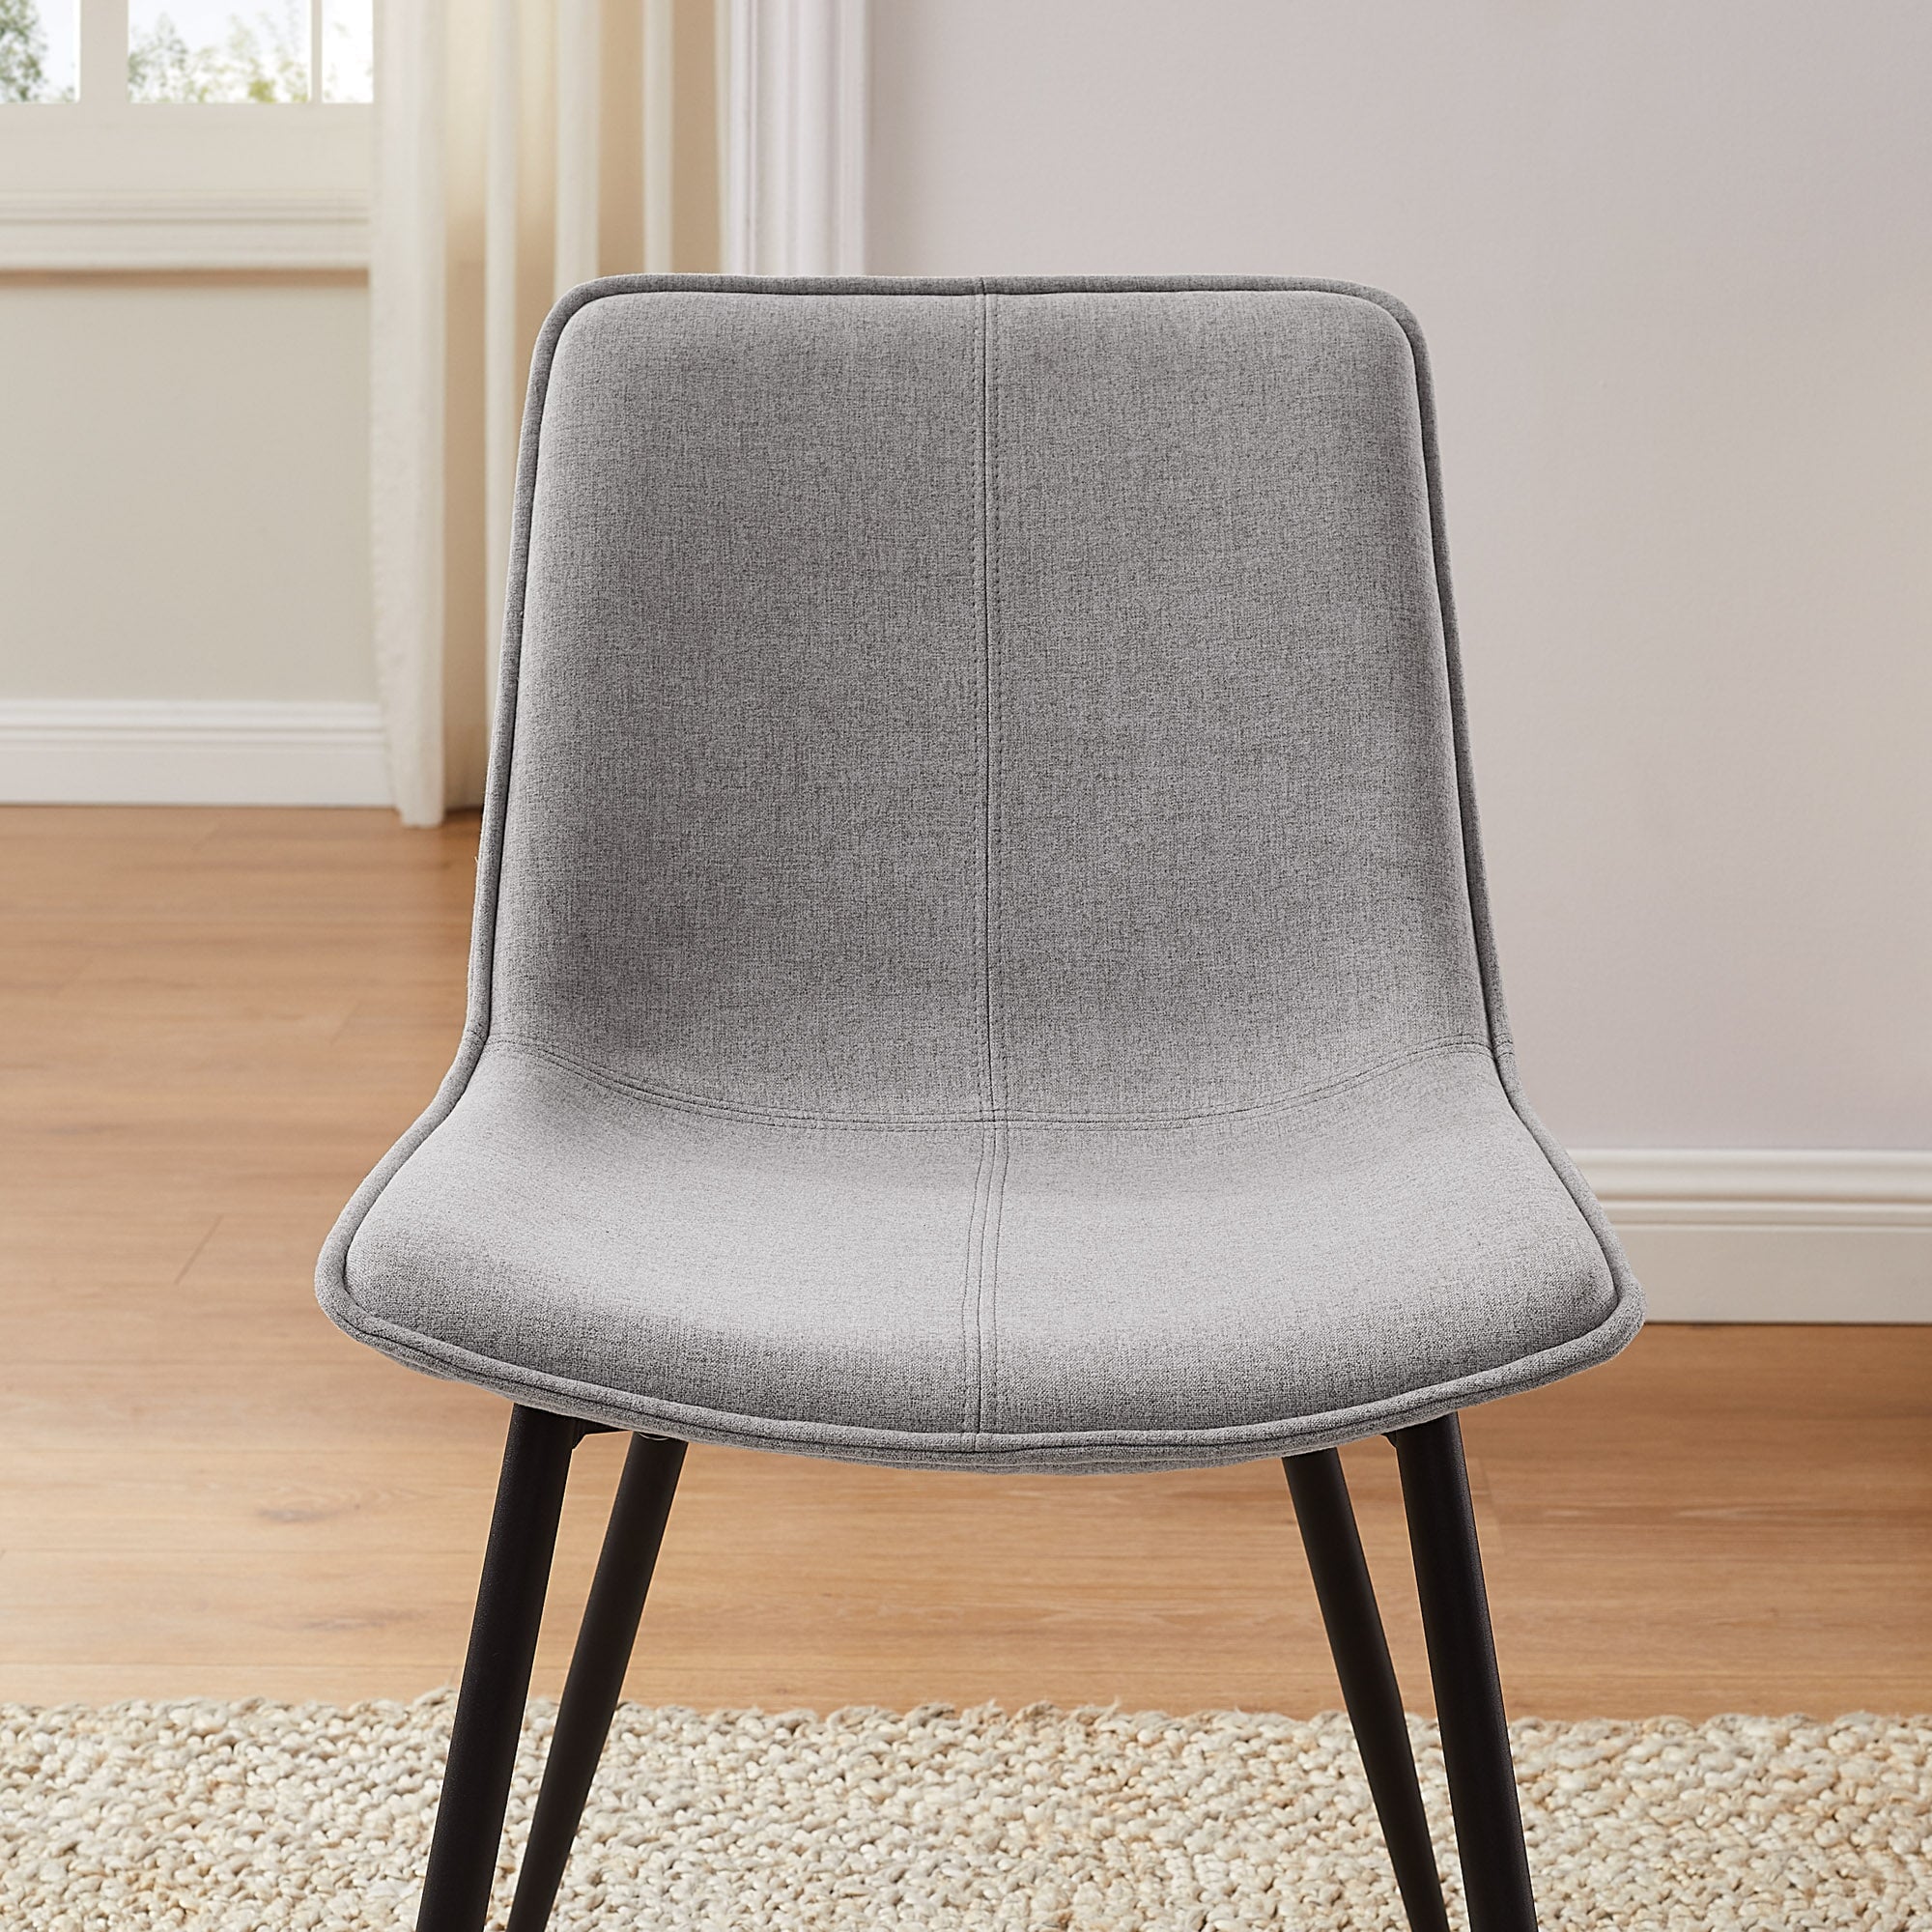 Tribeca Upholstered Dining Chair, Set of 2